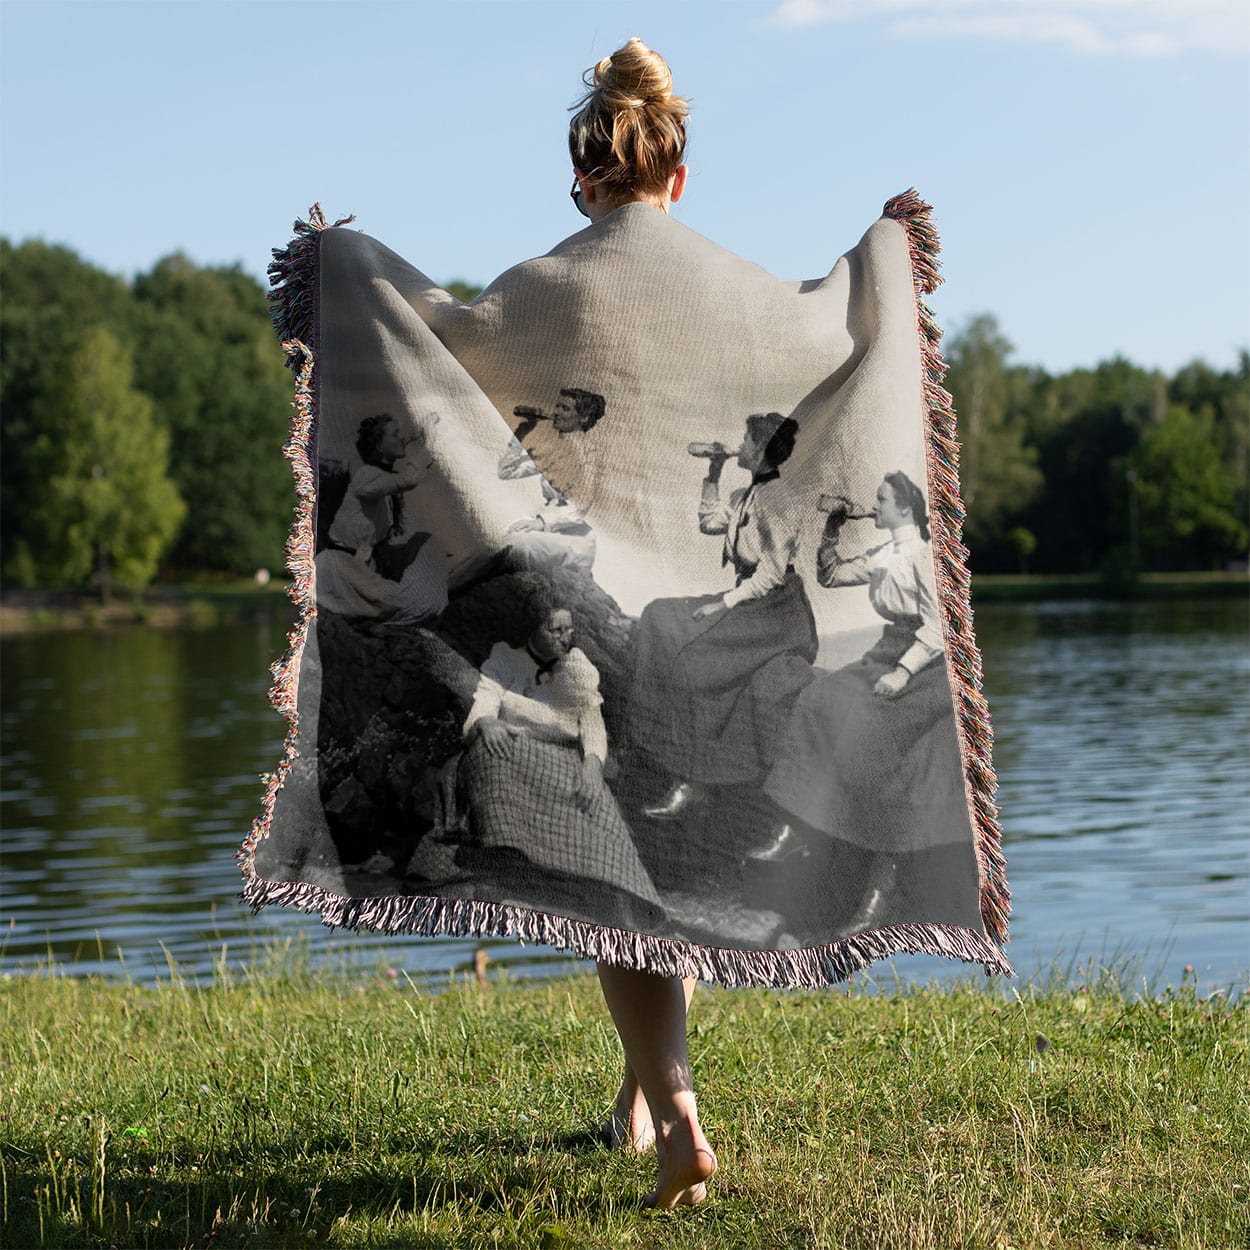 Fun College Woven Blanket Held on a Woman's Back Outside